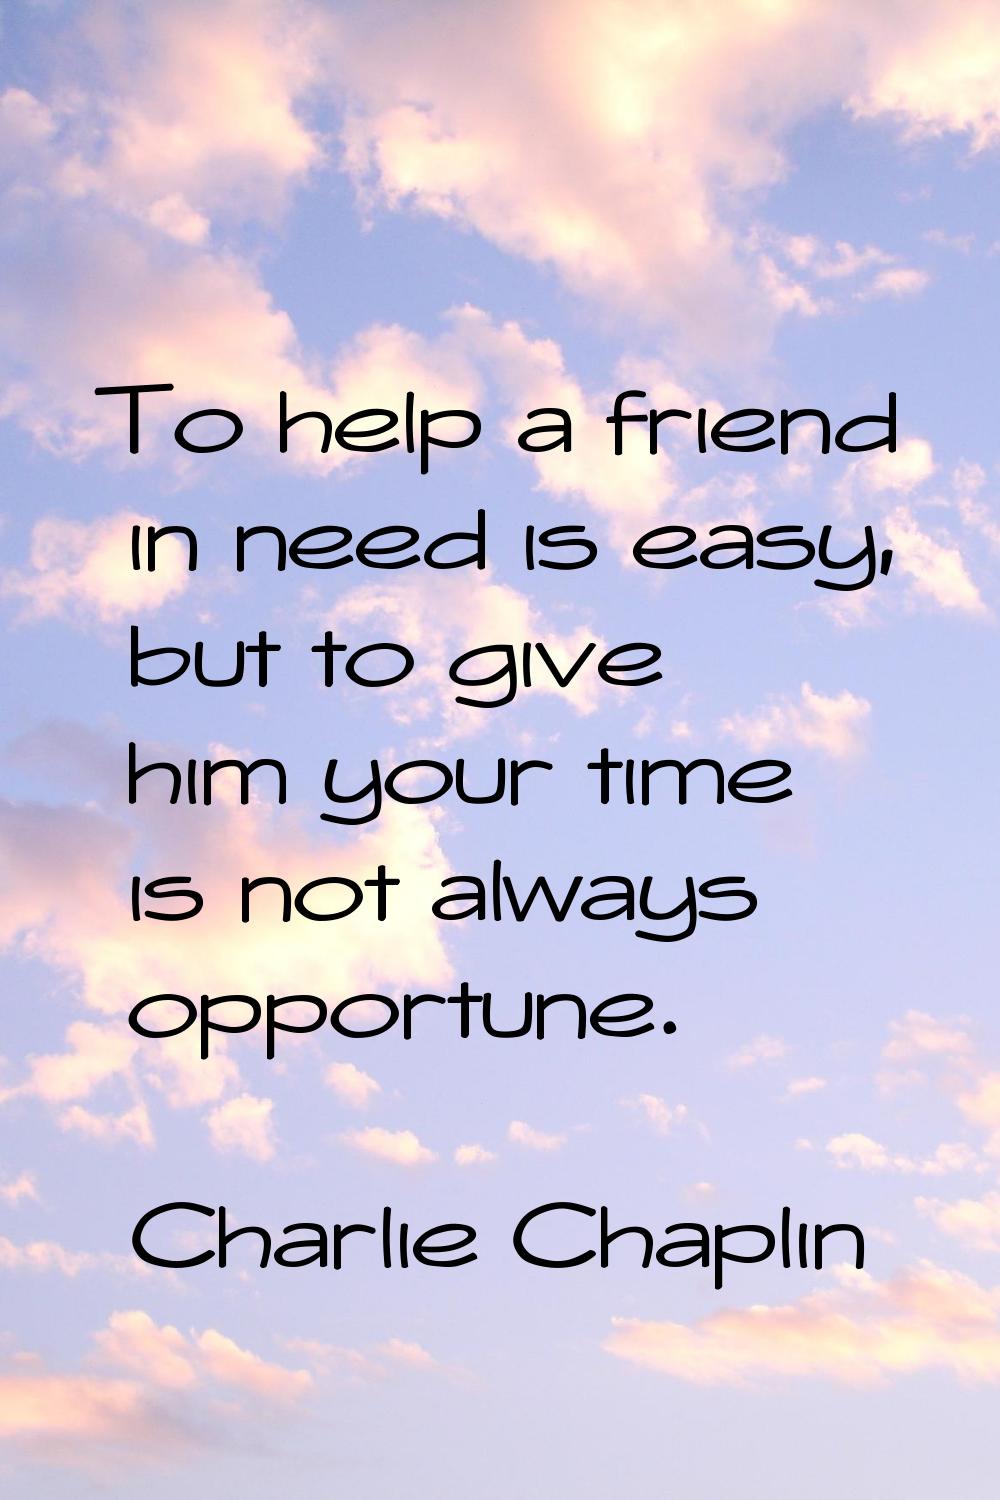 To help a friend in need is easy, but to give him your time is not always opportune.